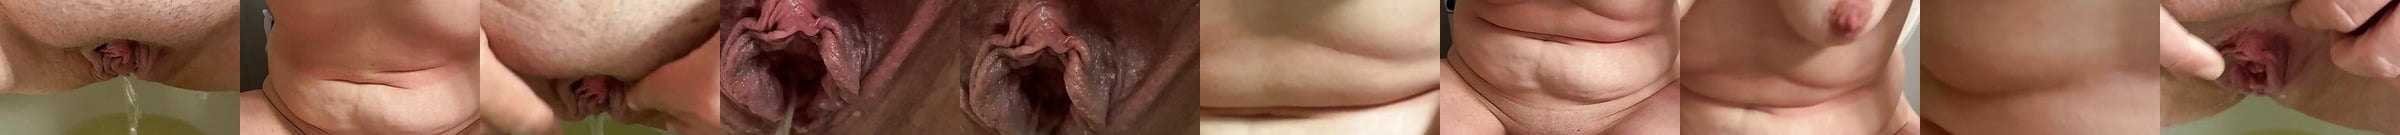 Mature Pissing Free Close Up Hd Porn Video Ce Xhamster Xhamster